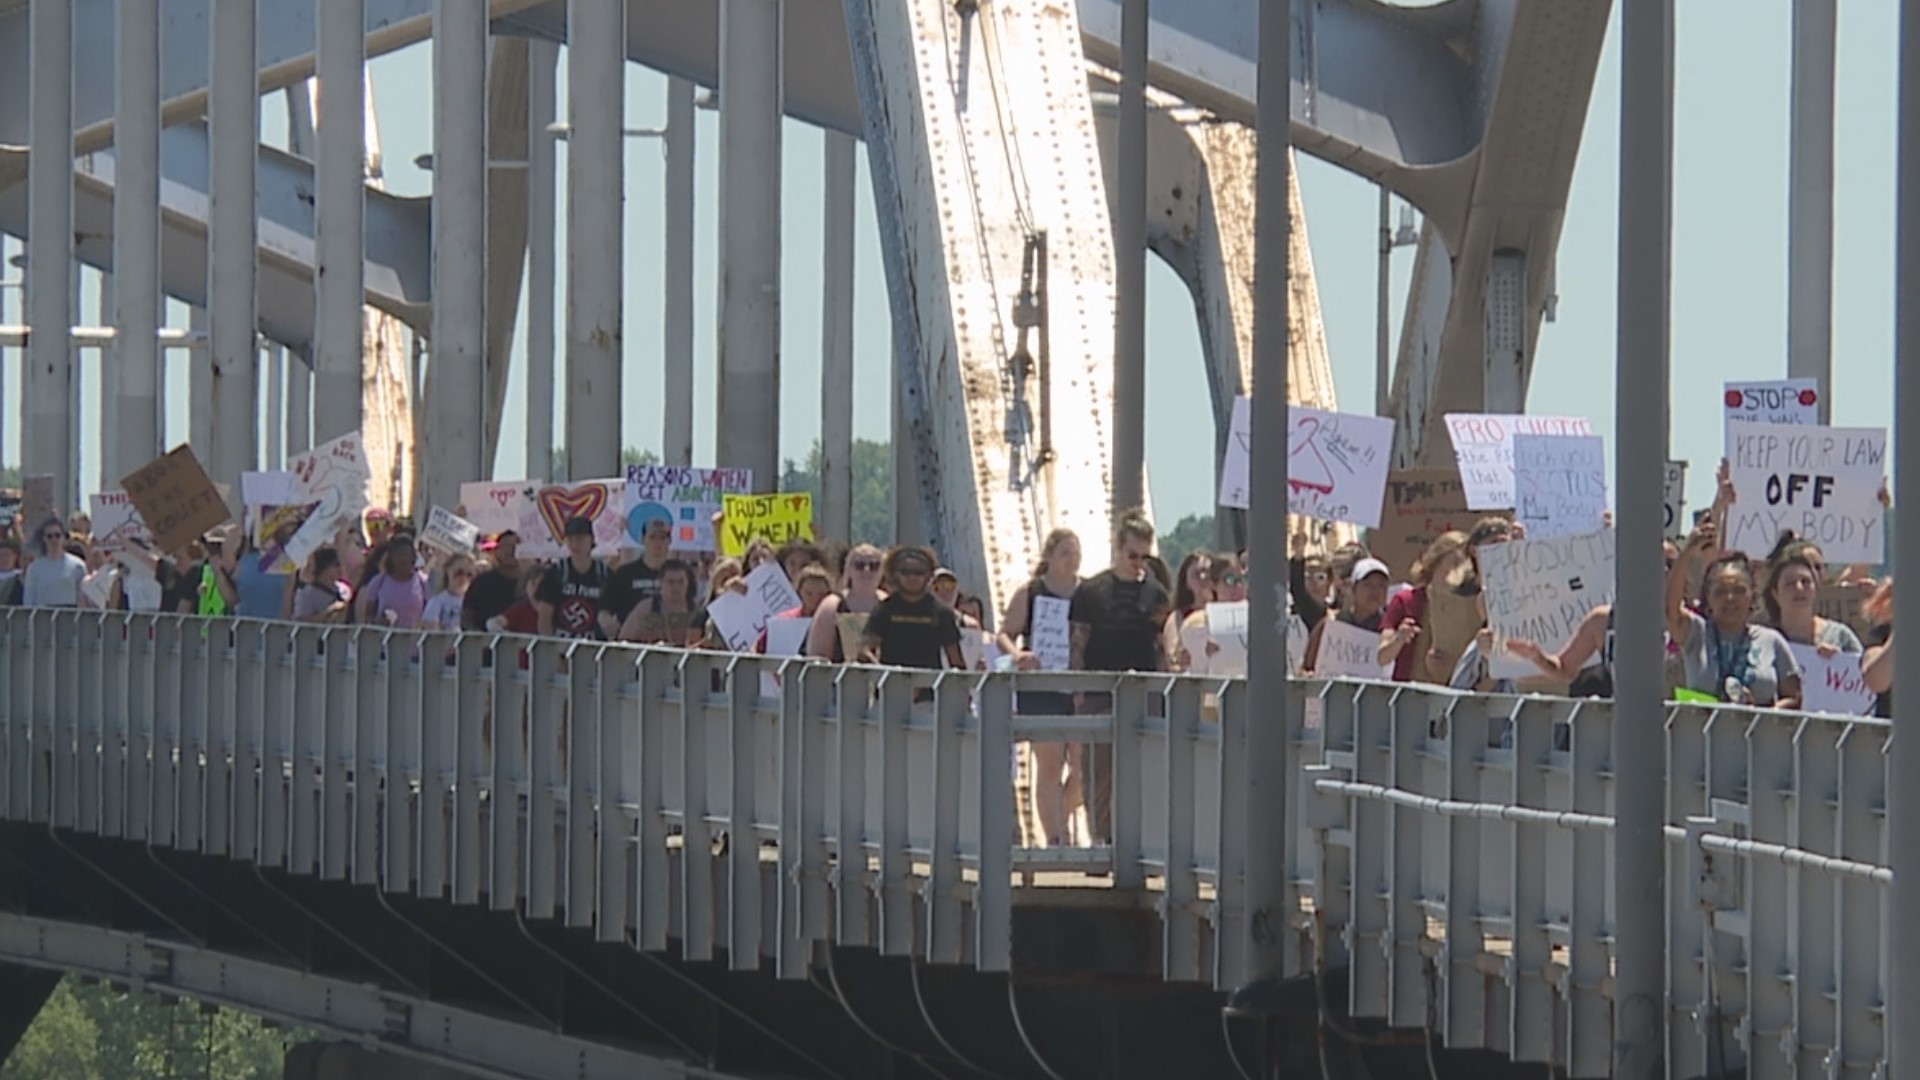 A large group of abortion rights protesters marched on Monday from Schwiebert Park and across the Centennial Bridge into Davenport.